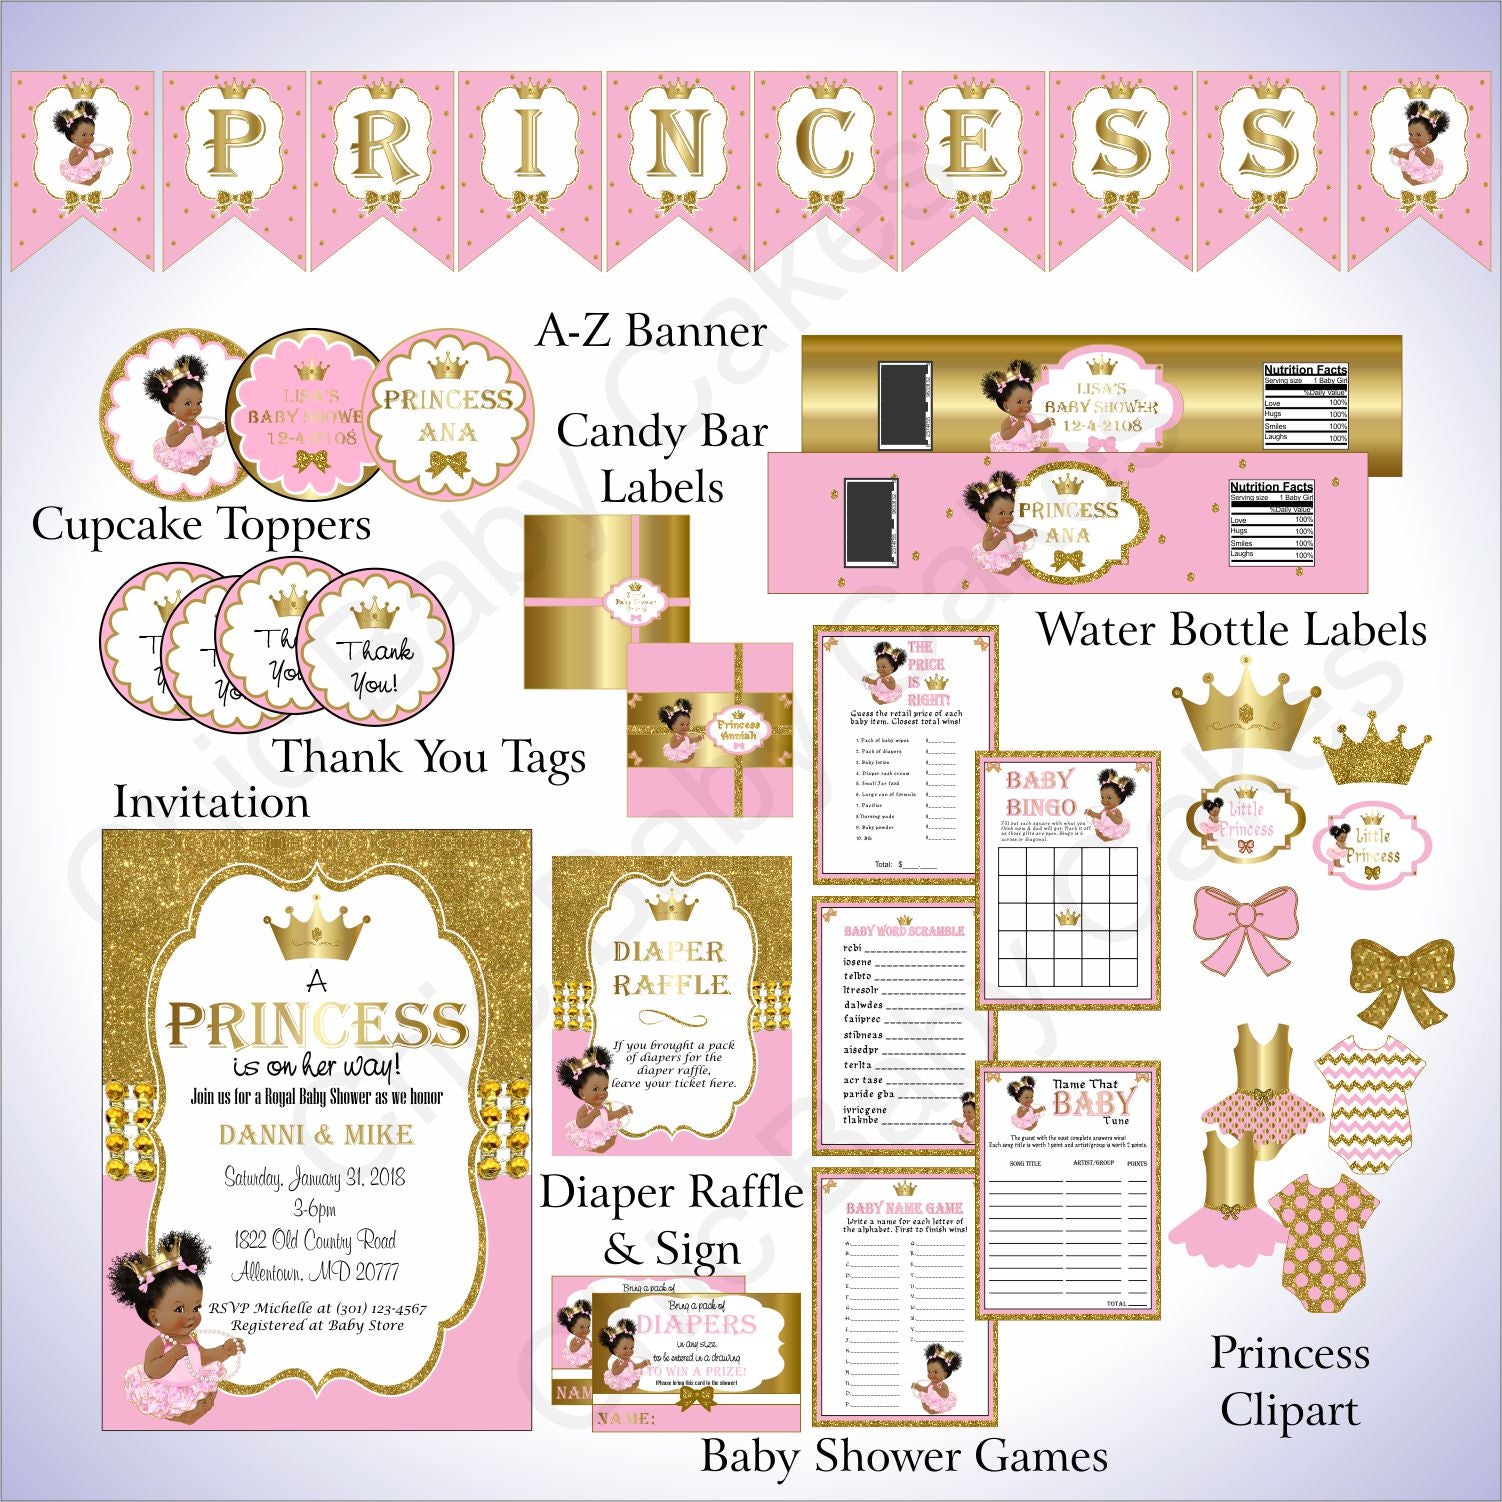 Pin on babyshower decor /party ideas all that glitters is pretty